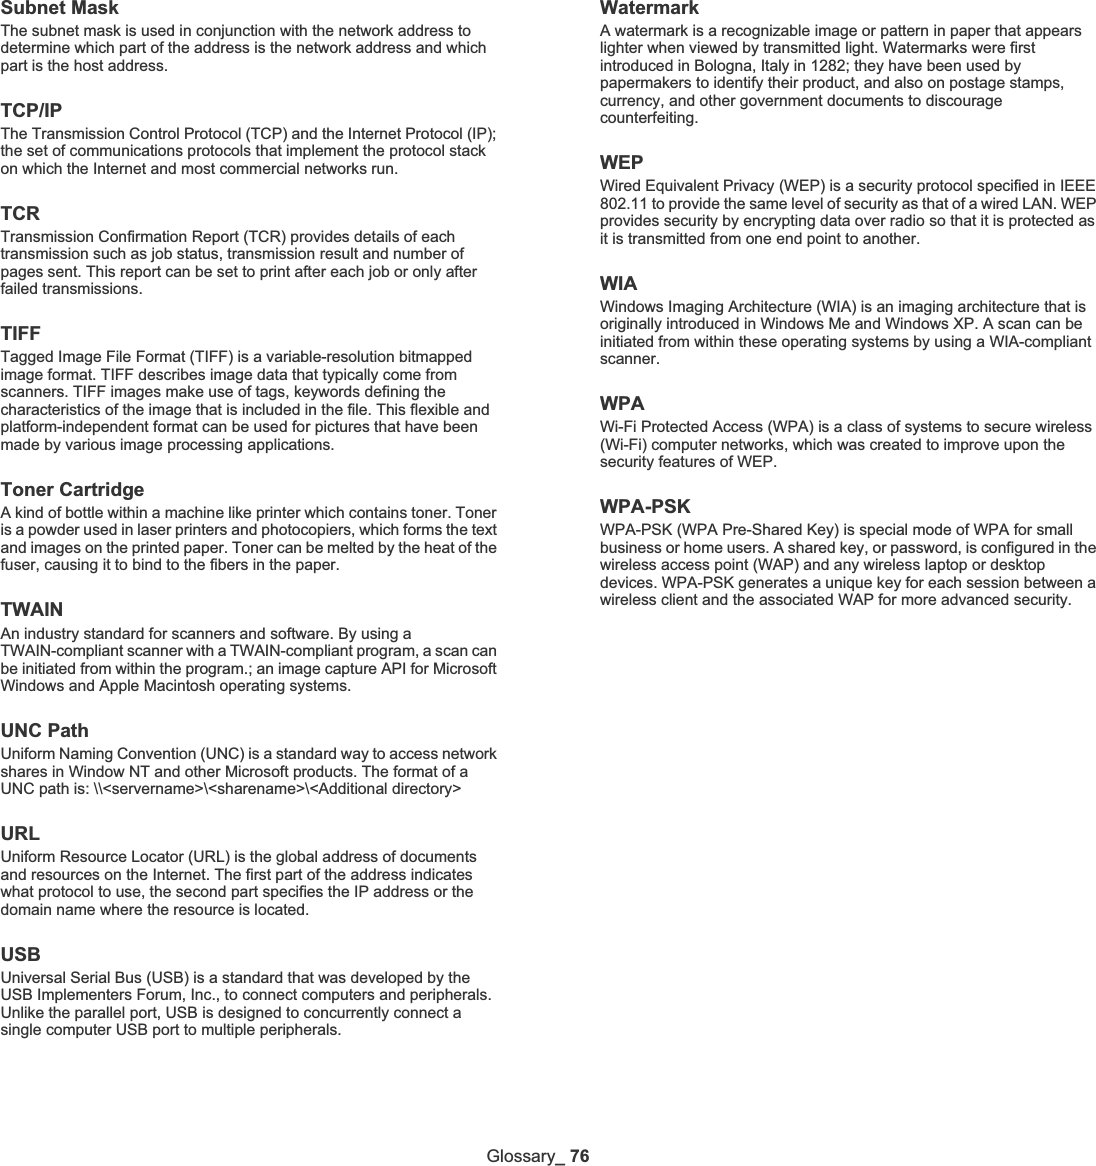 Glossary_76Subnet Mask The subnet mask is used in conjunction with the network address to determine which part of the address is the network address and which part is the host address.TCP/IPThe Transmission Control Protocol (TCP) and the Internet Protocol (IP); the set of communications protocols that implement the protocol stack on which the Internet and most commercial networks run.TCRTransmission Confirmation Report (TCR) provides details of each transmission such as job status, transmission result and number of pages sent. This report can be set to print after each job or only after failed transmissions.TIFFTagged Image File Format (TIFF) is a variable-resolution bitmapped image format. TIFF describes image data that typically come from scanners. TIFF images make use of tags, keywords defining the characteristics of the image that is included in the file. This flexible and platform-independent format can be used for pictures that have been made by various image processing applications.Toner CartridgeA kind of bottle within a machine like printer which contains toner. Toner is a powder used in laser printers and photocopiers, which forms the text and images on the printed paper. Toner can be melted by the heat of the fuser, causing it to bind to the fibers in the paper.TWAINAn industry standard for scanners and software. By using a TWAIN-compliant scanner with a TWAIN-compliant program, a scan can be initiated from within the program.; an image capture API for Microsoft Windows and Apple Macintosh operating systems.UNC PathUniform Naming Convention (UNC) is a standard way to access network shares in Window NT and other Microsoft products. The format of a UNC path is: \\&lt;servername&gt;\&lt;sharename&gt;\&lt;Additional directory&gt;URLUniform Resource Locator (URL) is the global address of documents and resources on the Internet. The first part of the address indicates what protocol to use, the second part specifies the IP address or the domain name where the resource is located.USBUniversal Serial Bus (USB) is a standard that was developed by the USB Implementers Forum, Inc., to connect computers and peripherals. Unlike the parallel port, USB is designed to concurrently connect a single computer USB port to multiple peripherals.WatermarkA watermark is a recognizable image or pattern in paper that appears lighter when viewed by transmitted light. Watermarks were first introduced in Bologna, Italy in 1282; they have been used by papermakers to identify their product, and also on postage stamps, currency, and other government documents to discourage counterfeiting.WEPWired Equivalent Privacy (WEP) is a security protocol specified in IEEE 802.11 to provide the same level of security as that of a wired LAN. WEP provides security by encrypting data over radio so that it is protected as it is transmitted from one end point to another.WIAWindows Imaging Architecture (WIA) is an imaging architecture that is originally introduced in Windows Me and Windows XP. A scan can be initiated from within these operating systems by using a WIA-compliant scanner.WPAWi-Fi Protected Access (WPA) is a class of systems to secure wireless (Wi-Fi) computer networks, which was created to improve upon the security features of WEP.WPA-PSKWPA-PSK (WPA Pre-Shared Key) is special mode of WPA for small business or home users. A shared key, or password, is configured in the wireless access point (WAP) and any wireless laptop or desktop devices. WPA-PSK generates a unique key for each session between a wireless client and the associated WAP for more advanced security.